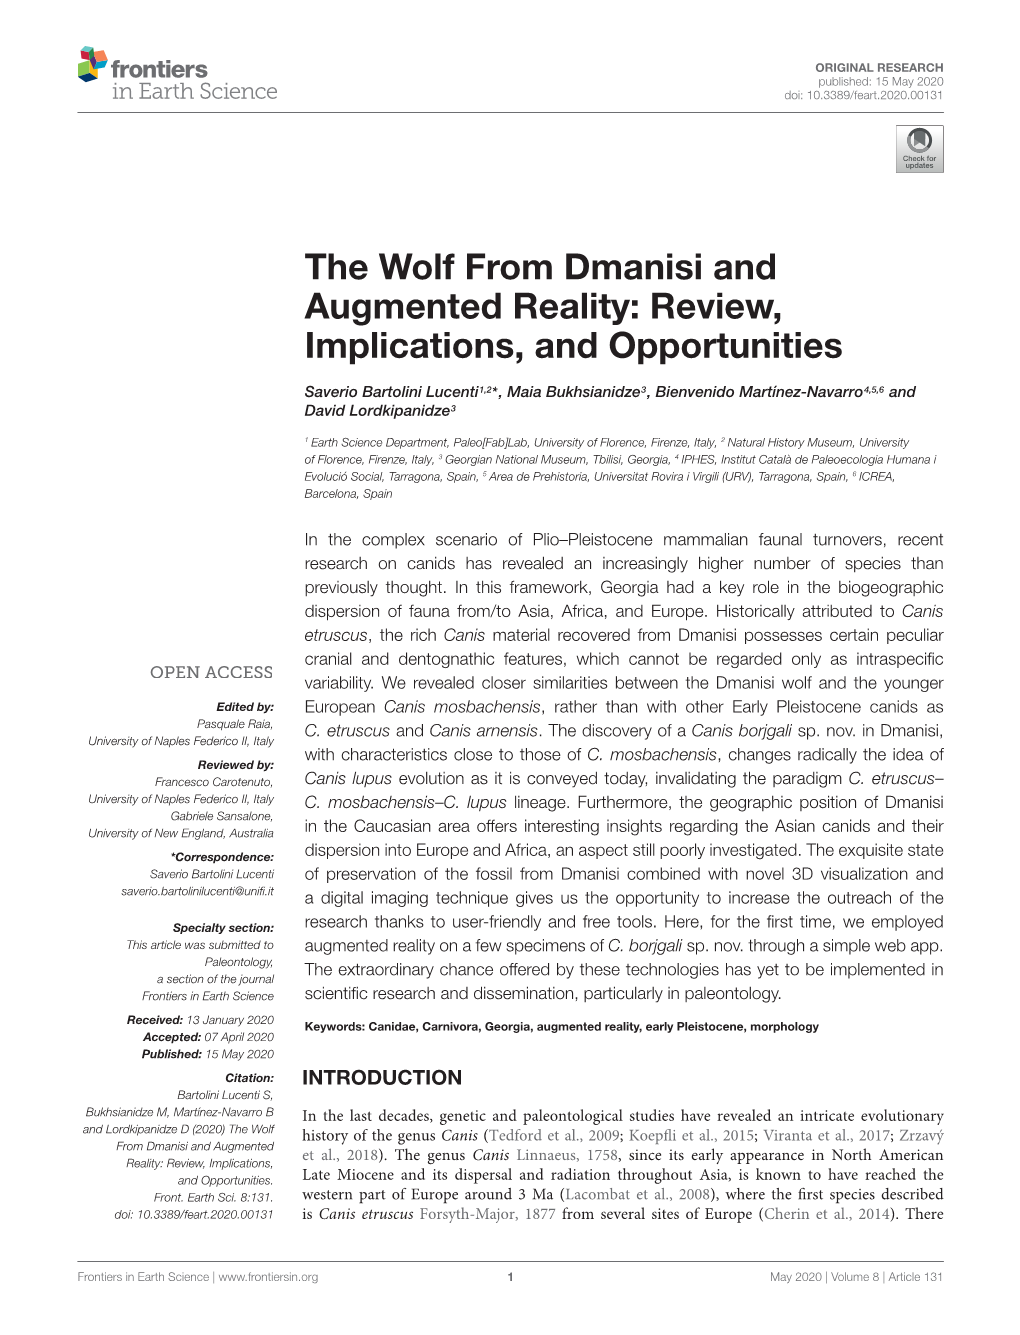 The Wolf from Dmanisi and Augmented Reality: Review, Implications, and Opportunities